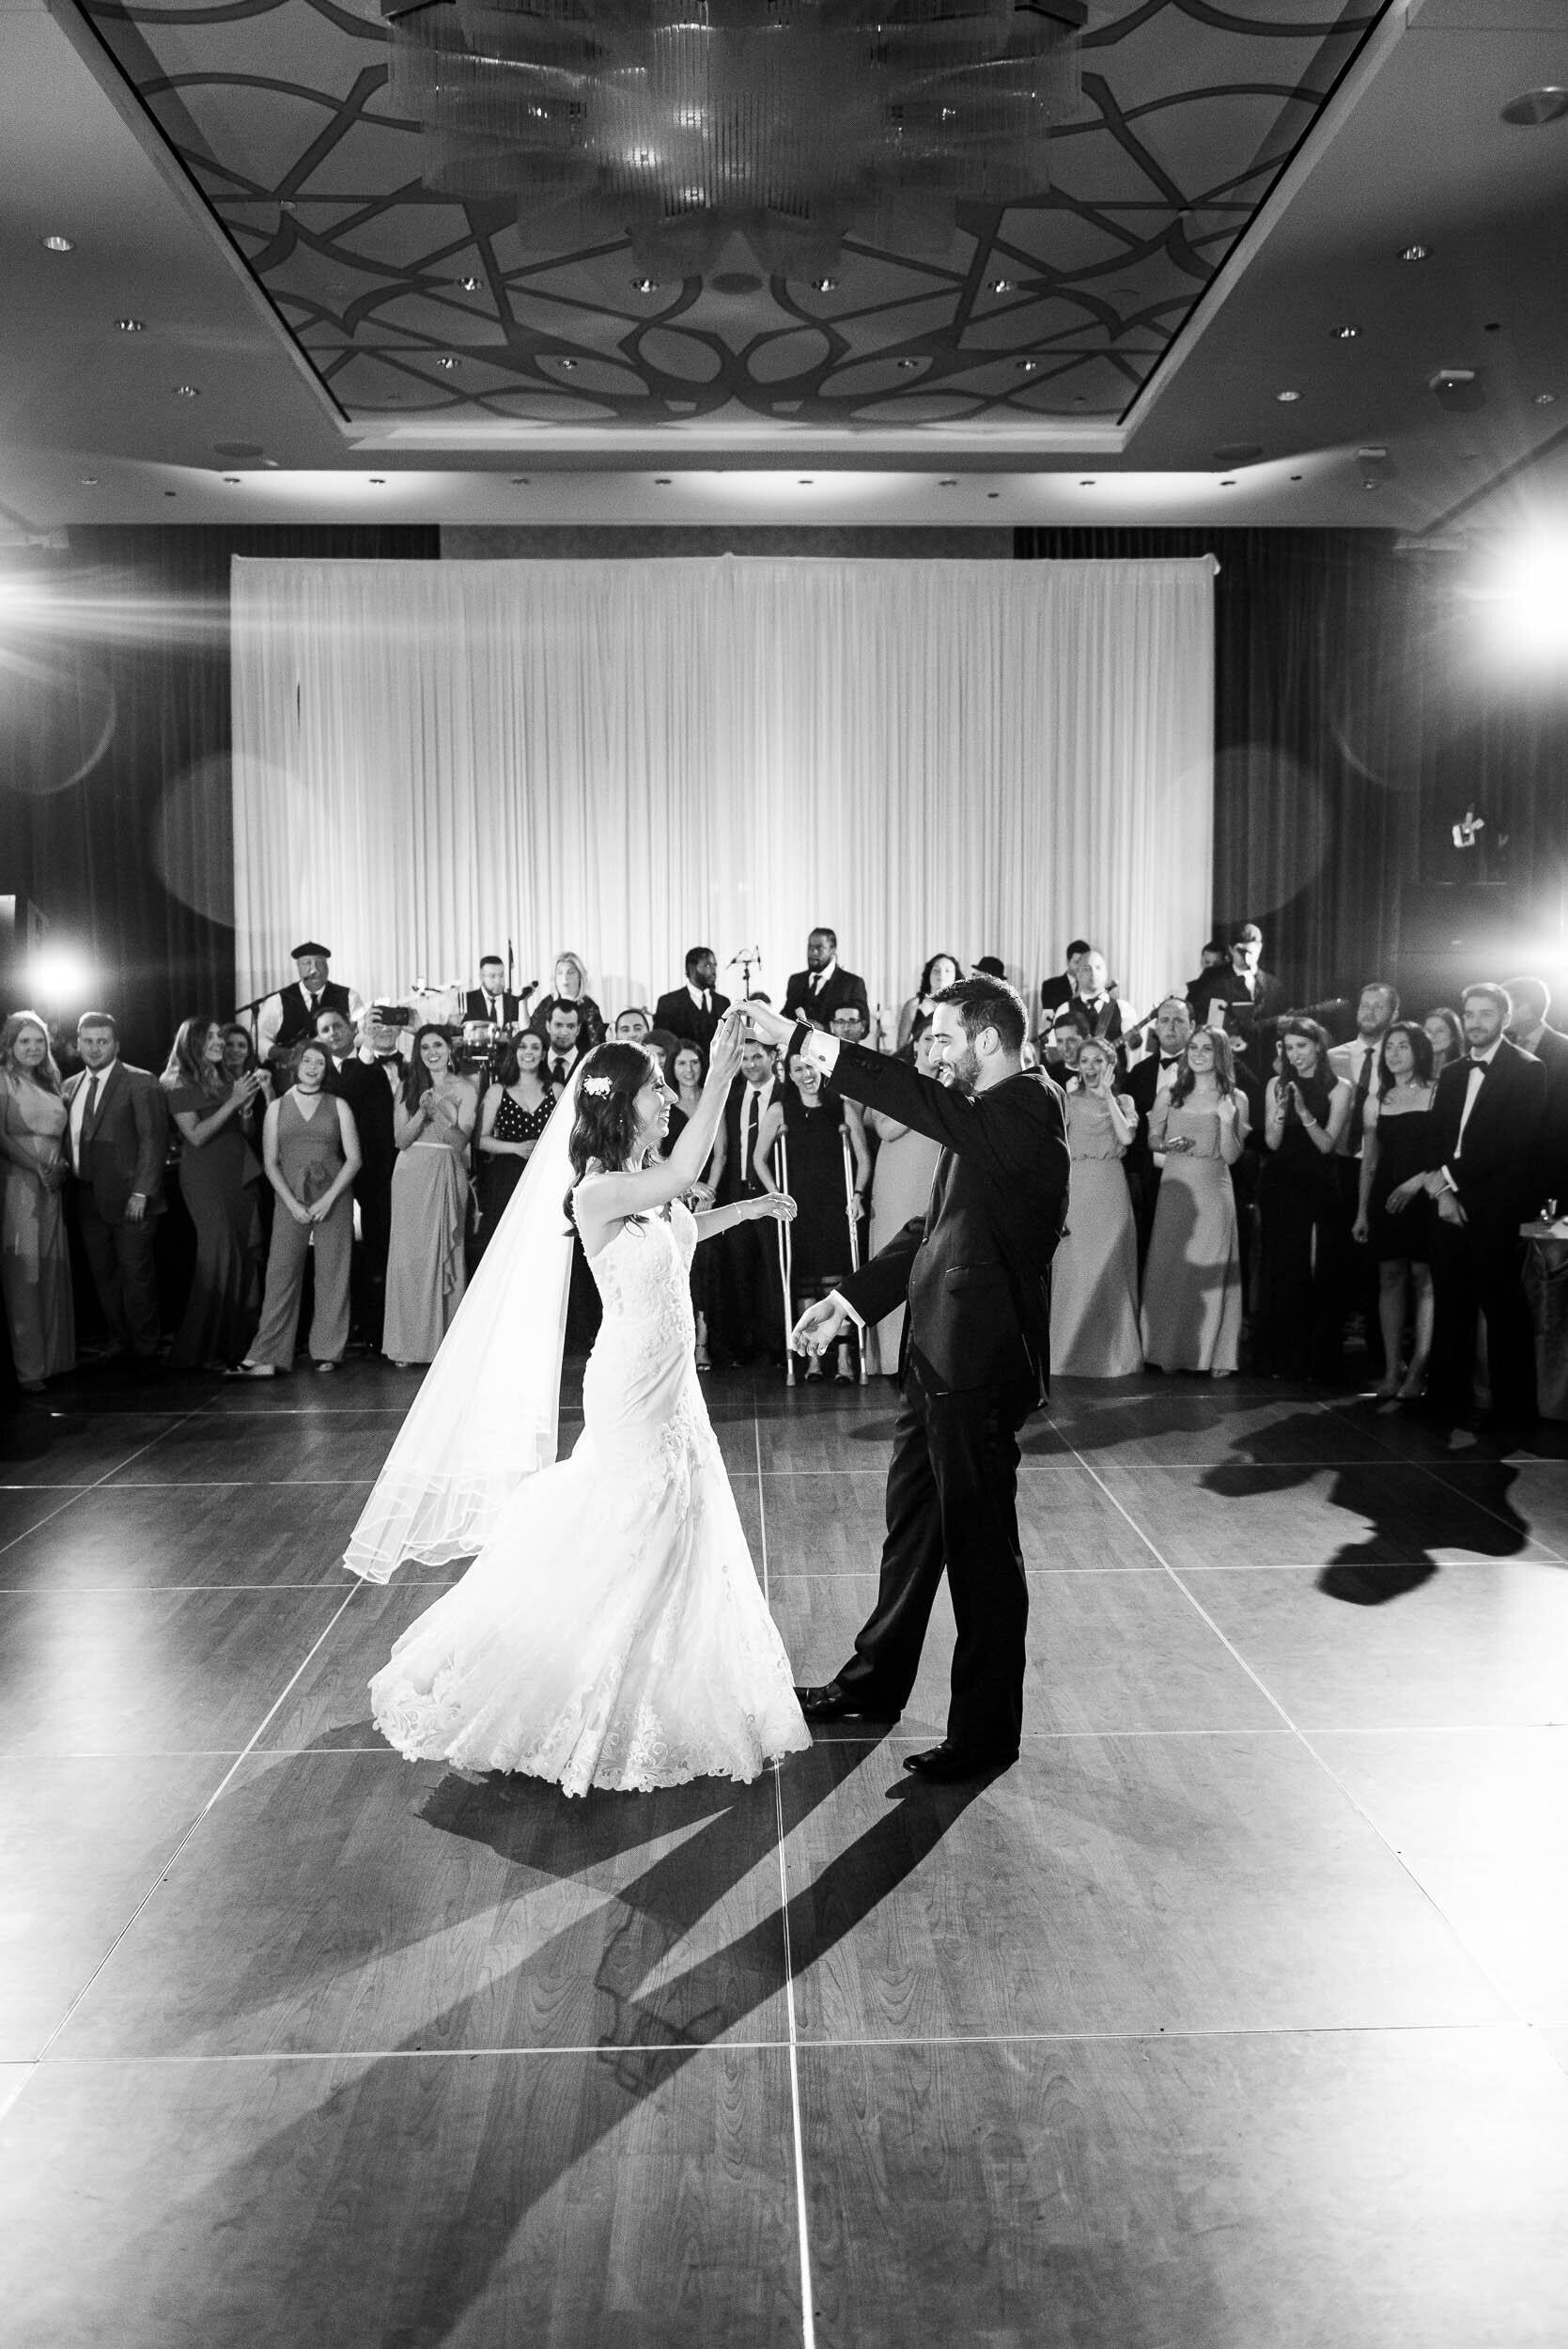 Bride and groom dancing: Loews Chicago Hotel Wedding captured by J. Brown Photography